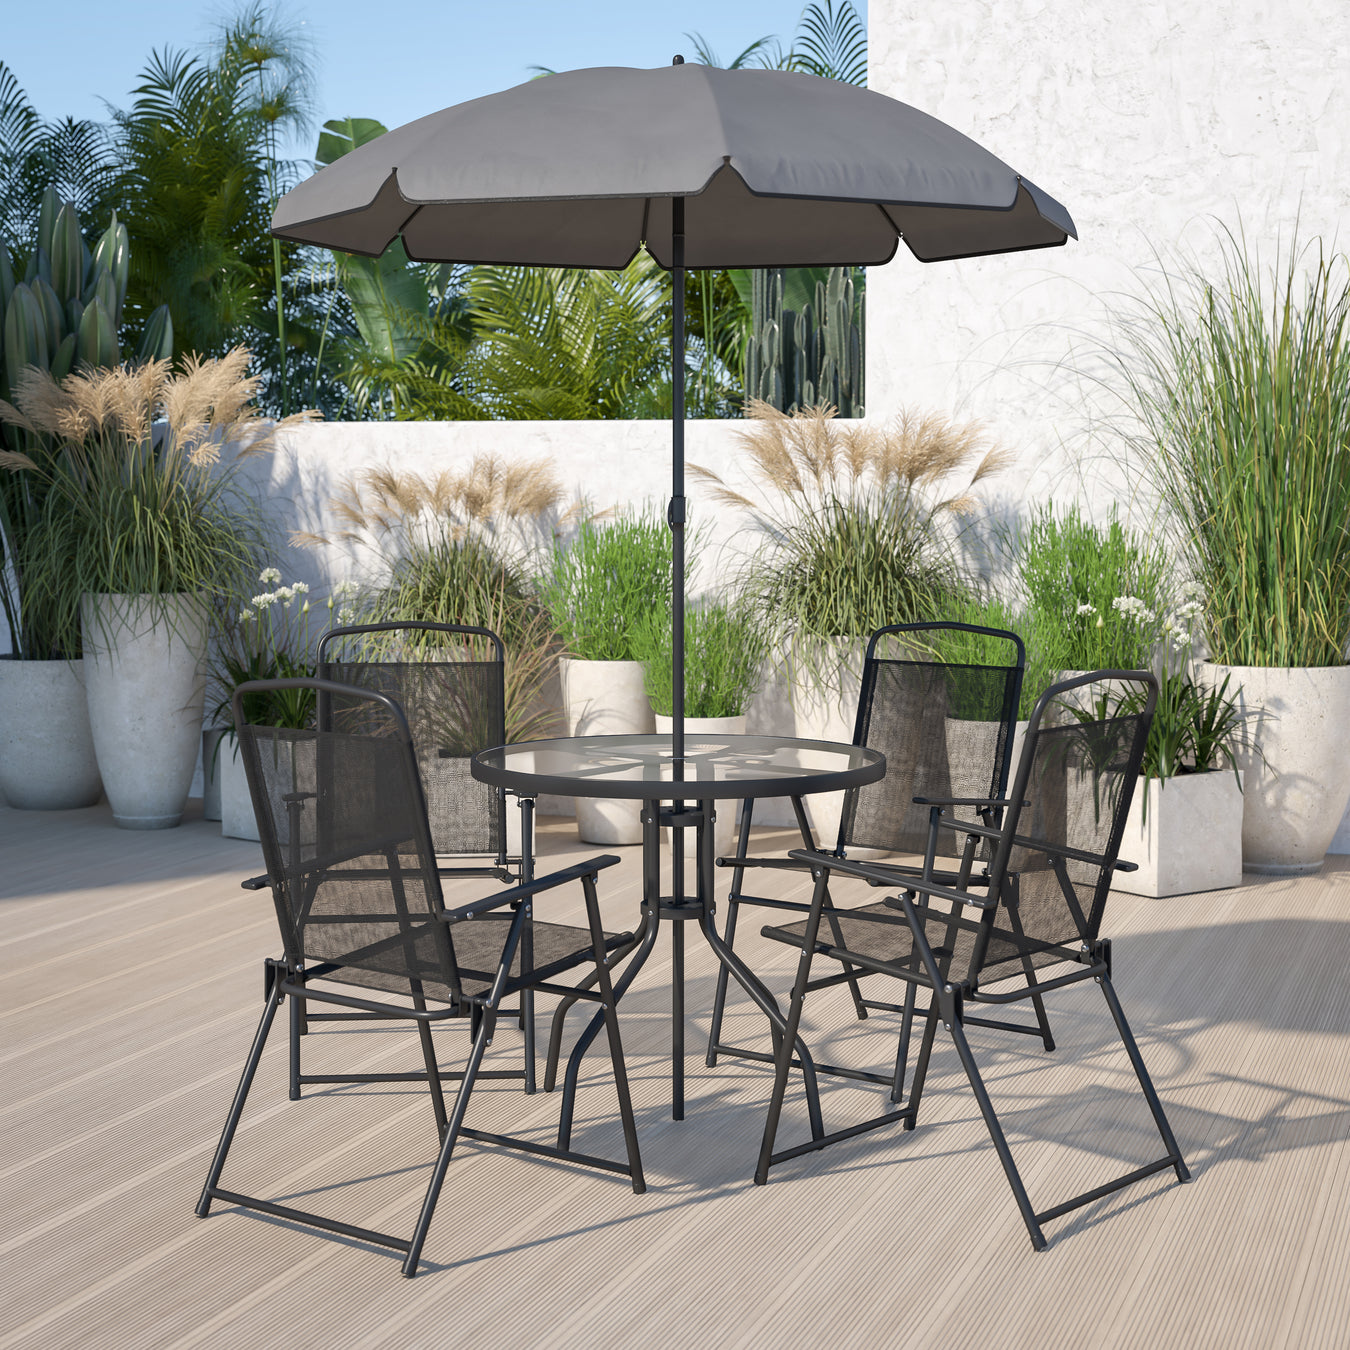 Patio Chairs & Table Set